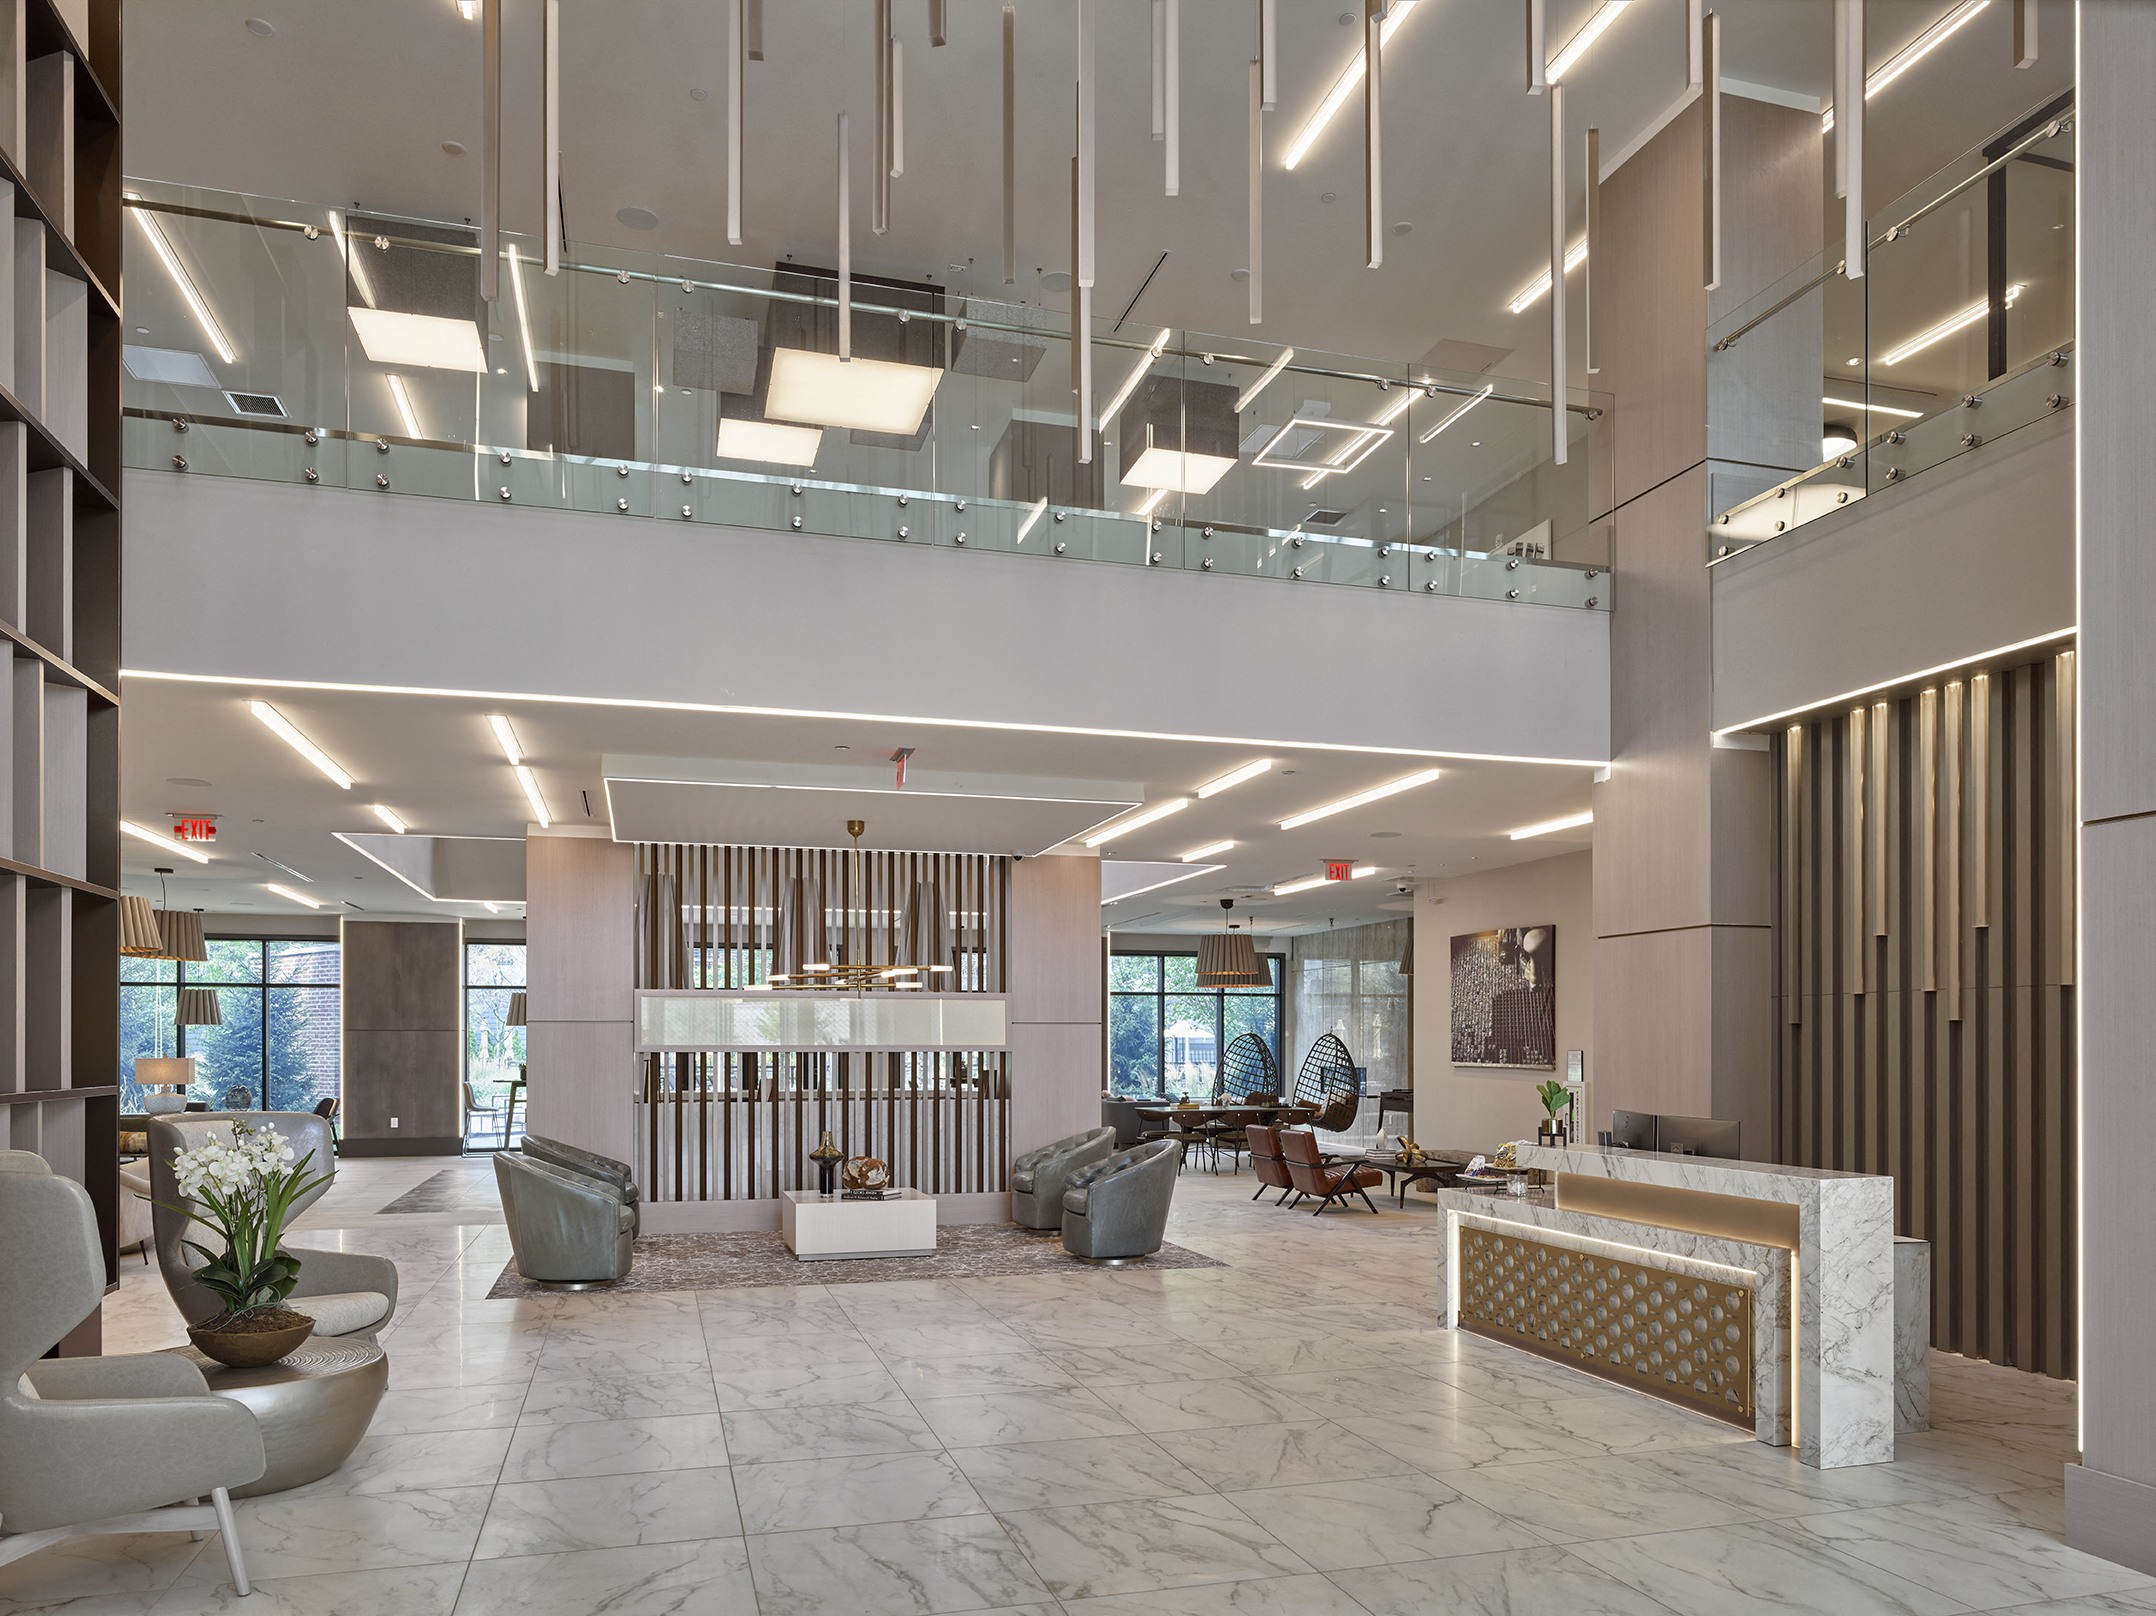 clubroom, two story lobby, amenity spaces